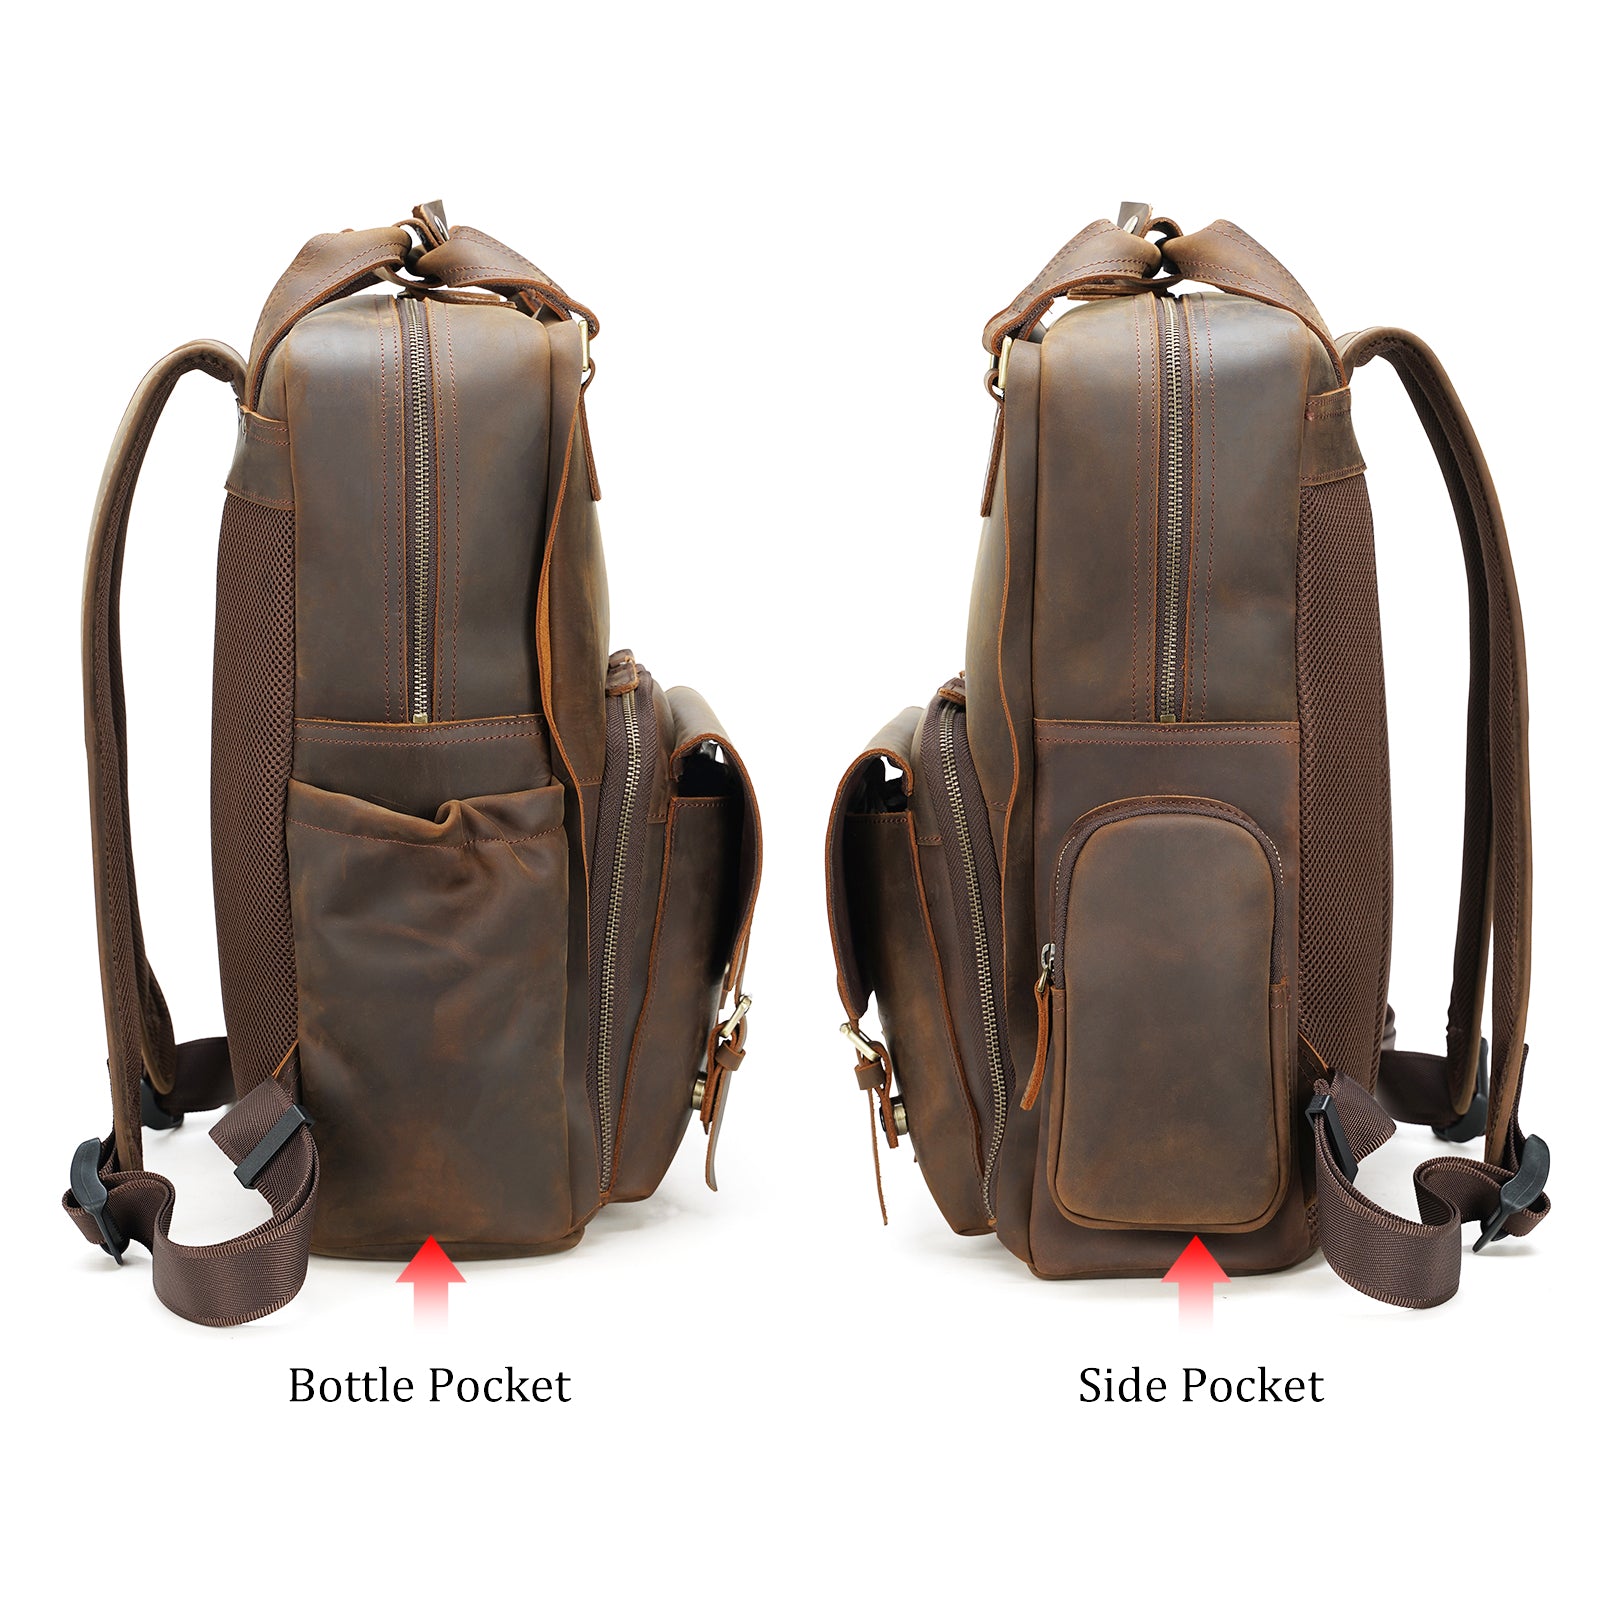 Leather Backpacks - Travel Rucksacks - Laptop Bags | Pampora Leather